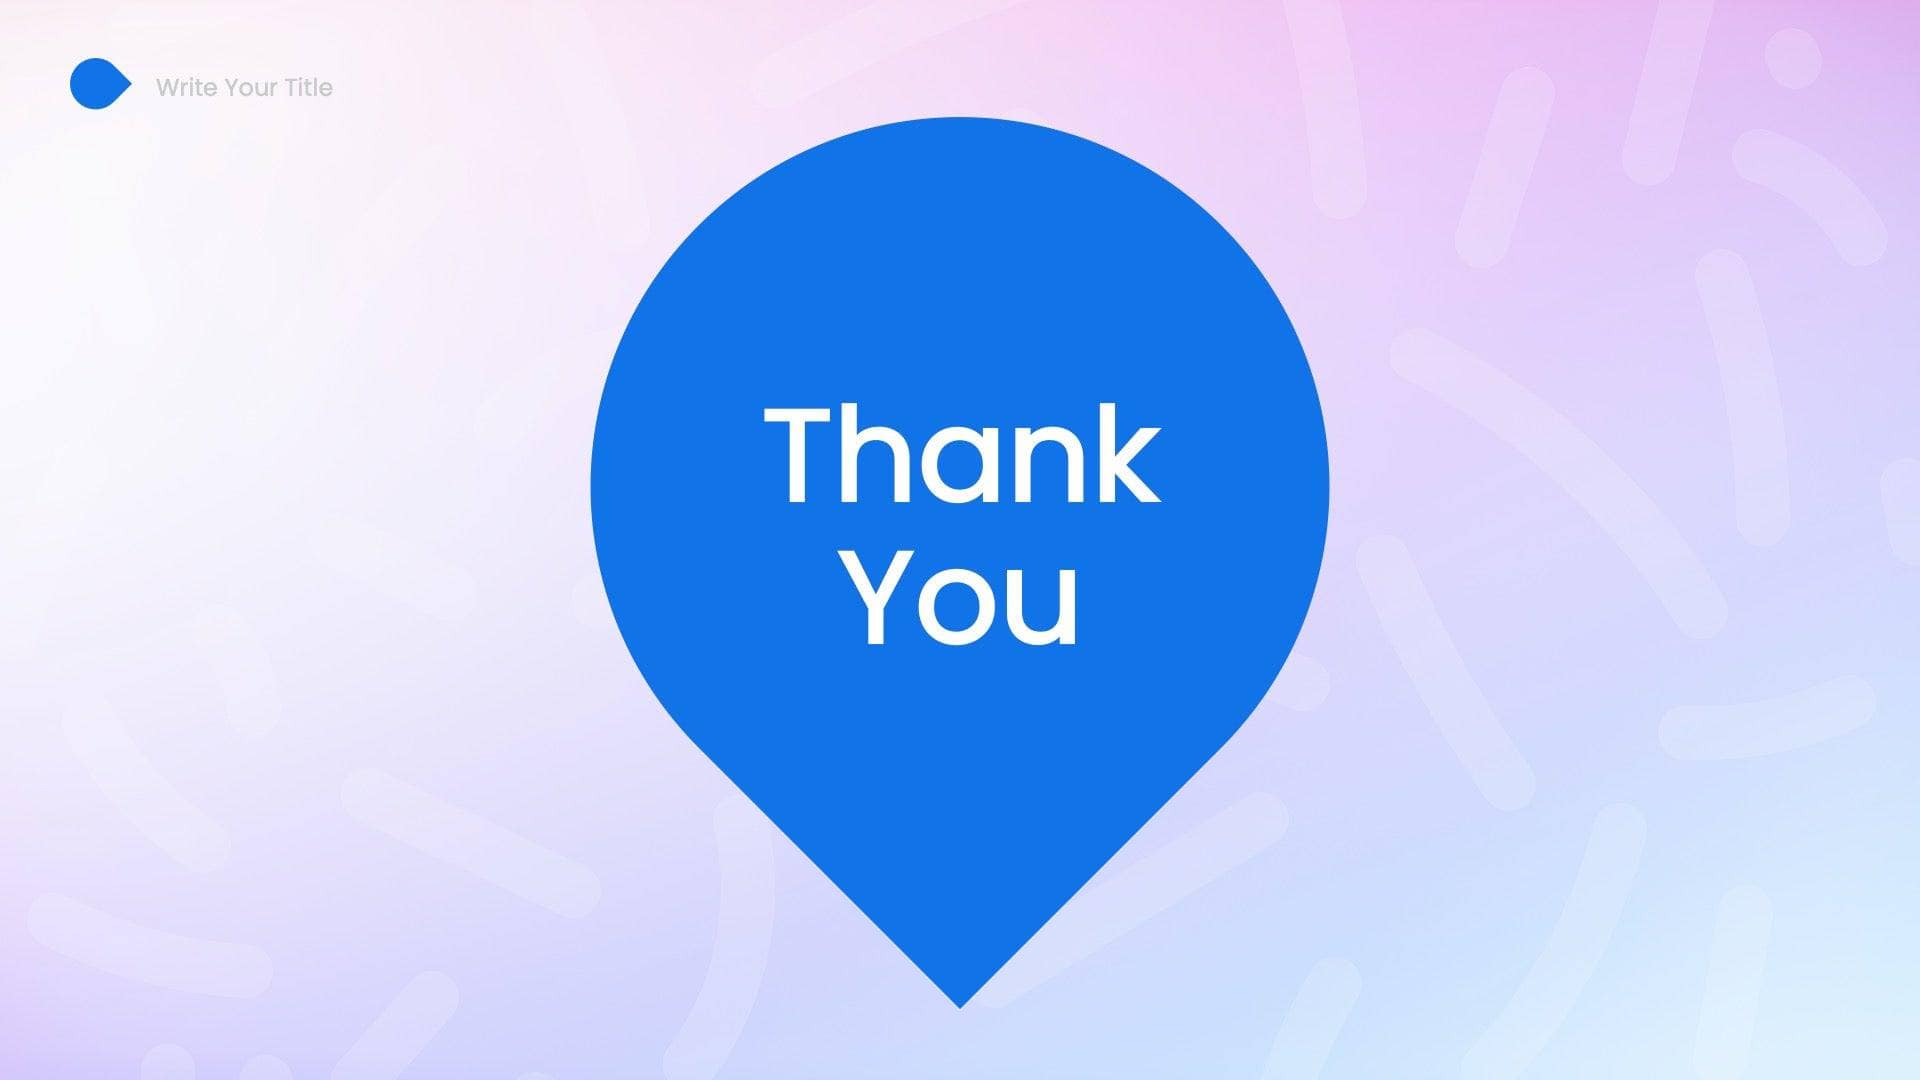 thank you images for presentation in blue